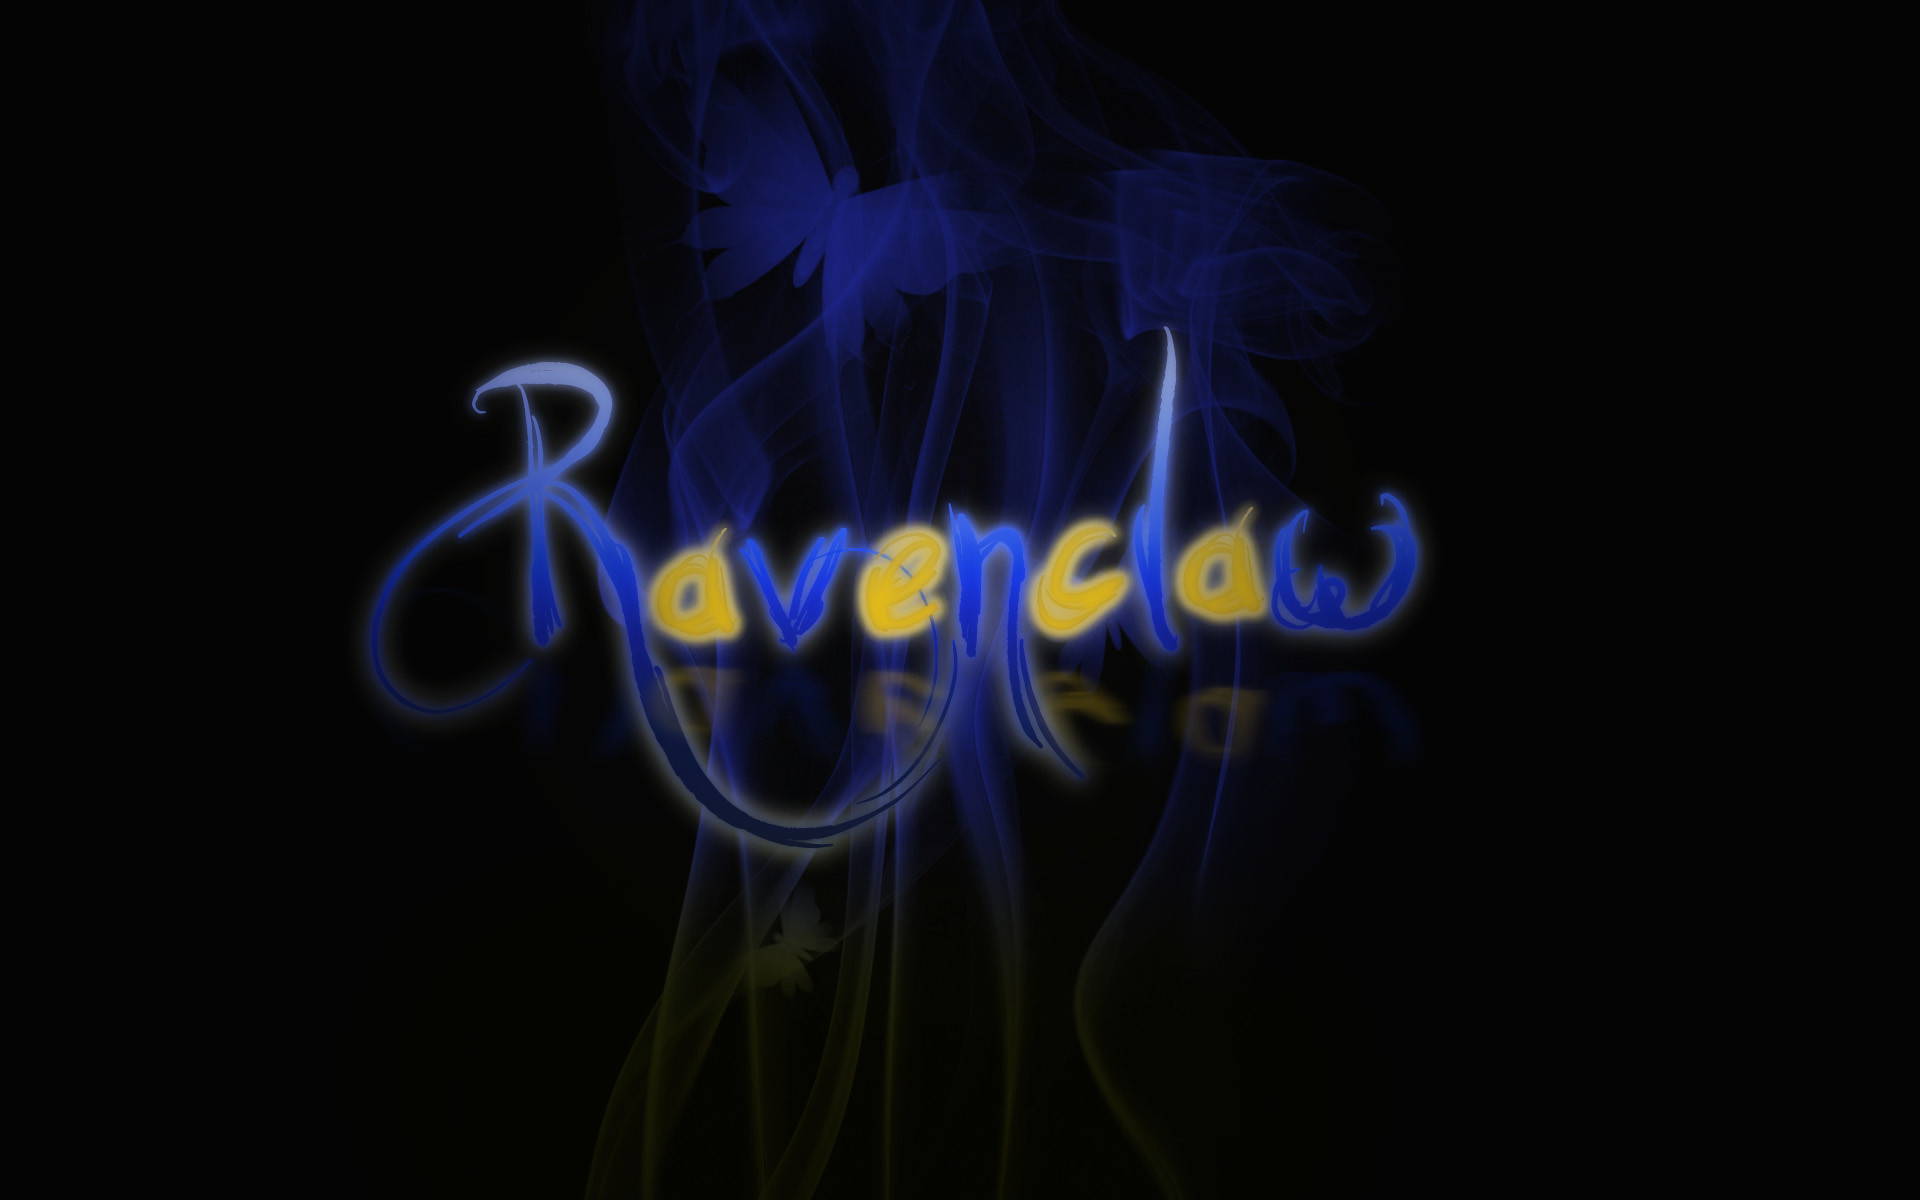 1920x1200 ... Harry Potter Iphone Wallpaper Ravenclaw Ravenclaw wallpaper by ...